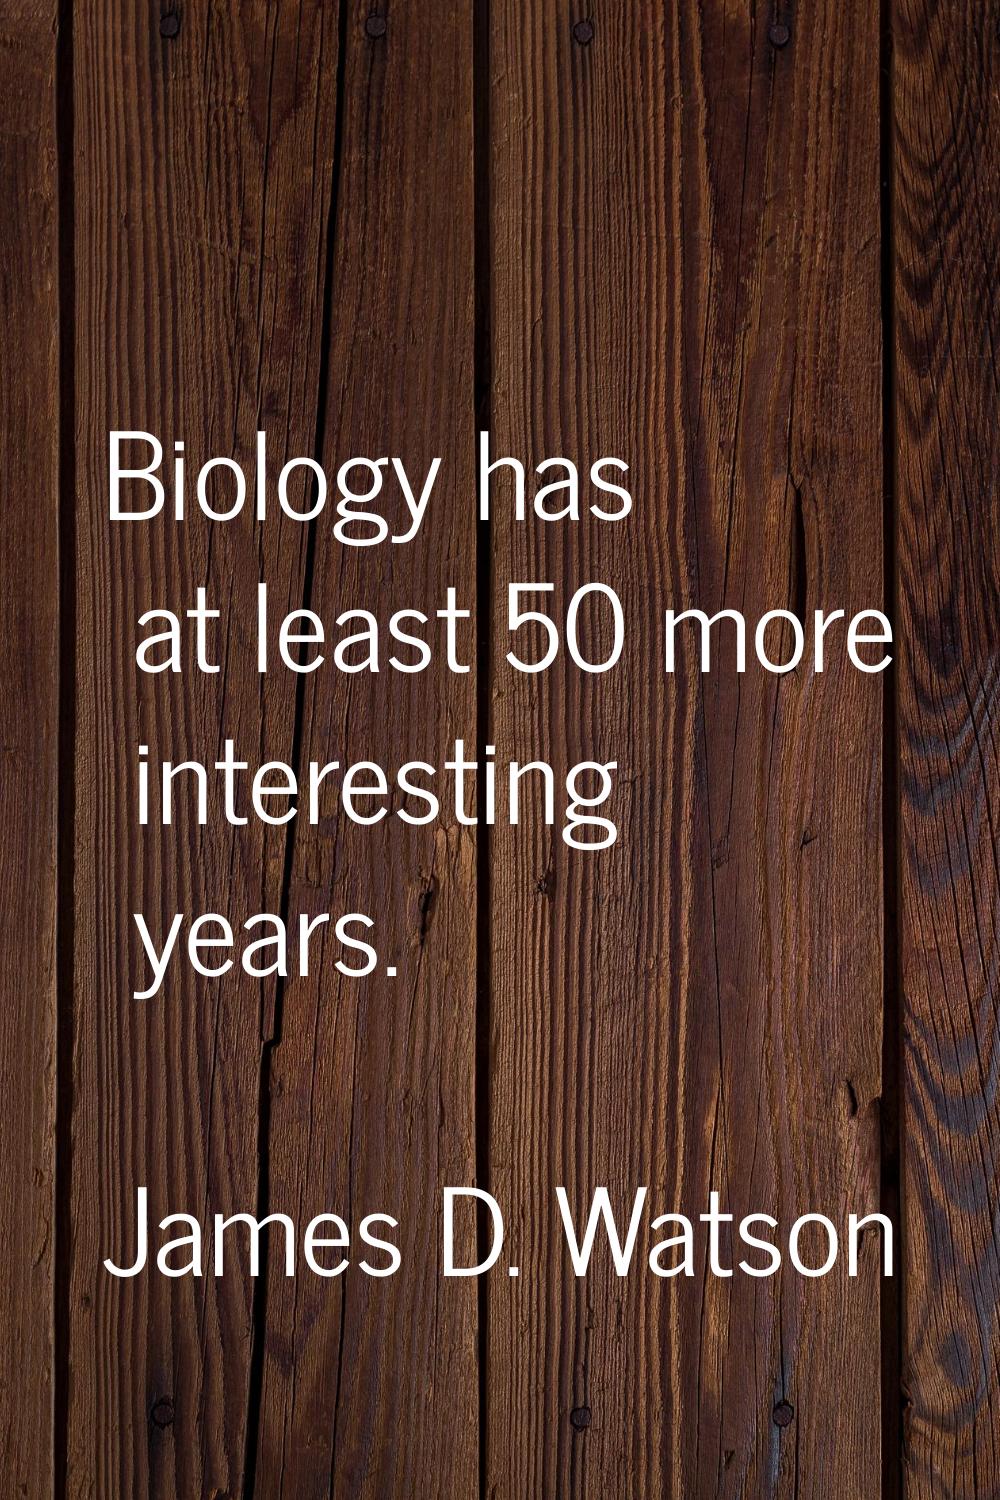 Biology has at least 50 more interesting years.